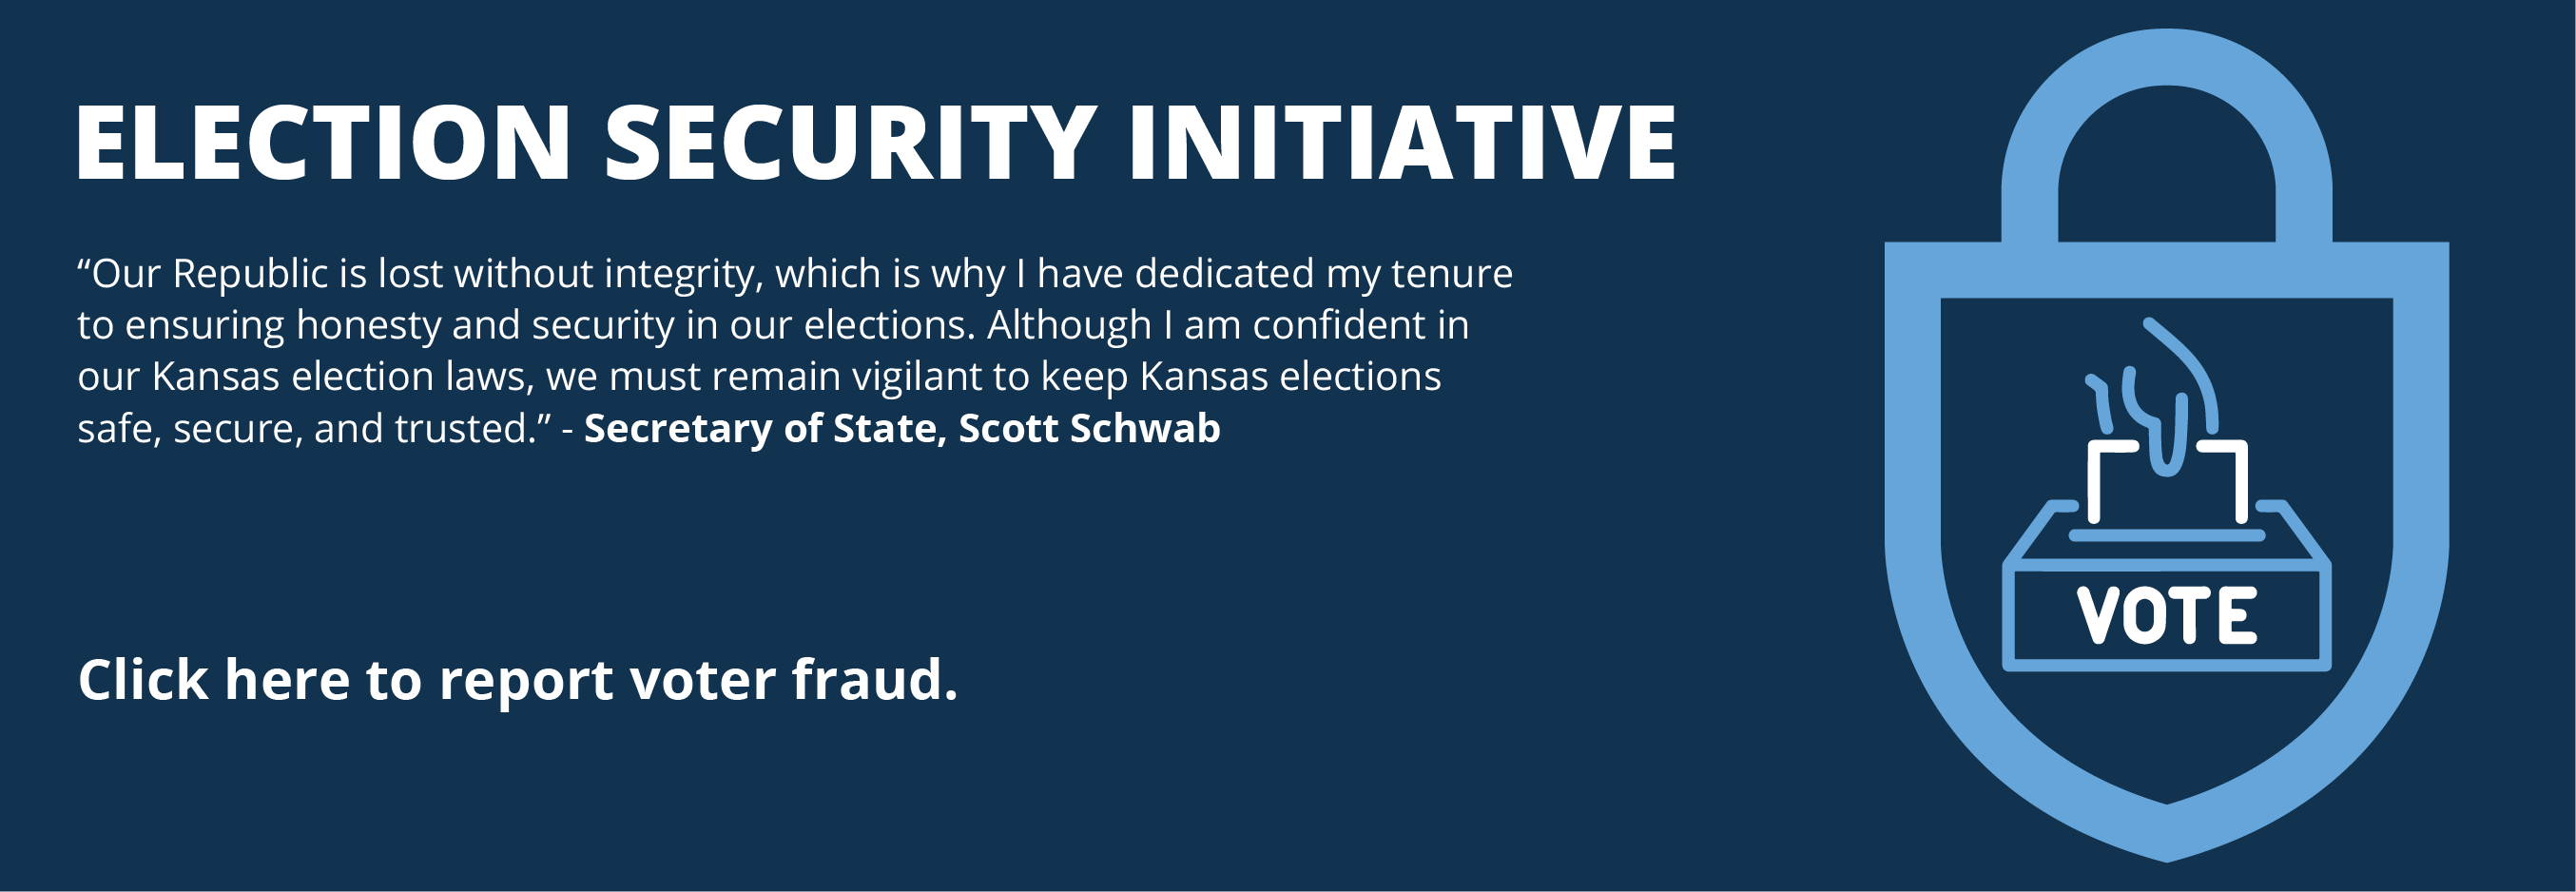 Election Security Initiative image